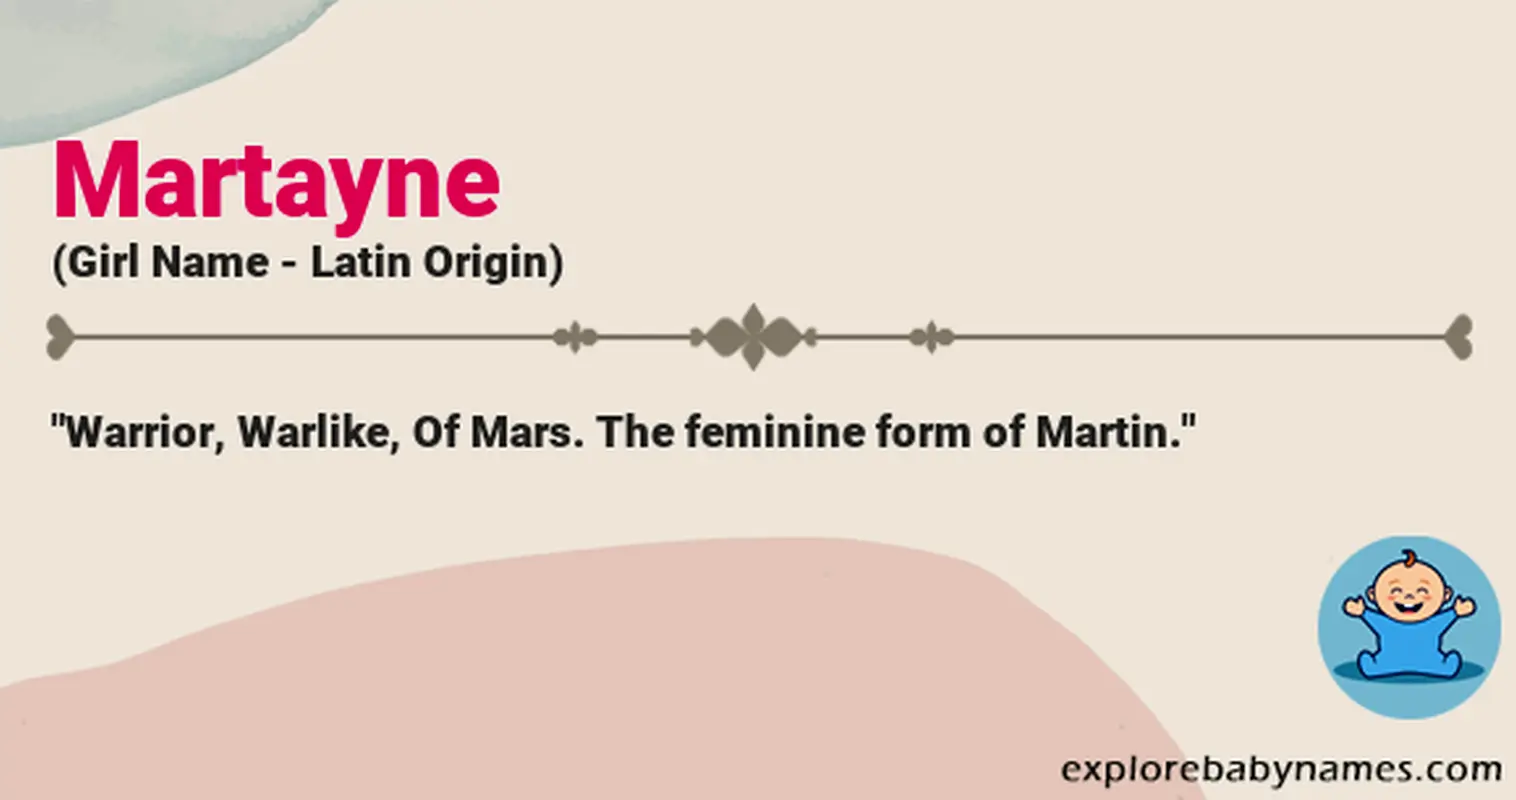 Meaning of Martayne